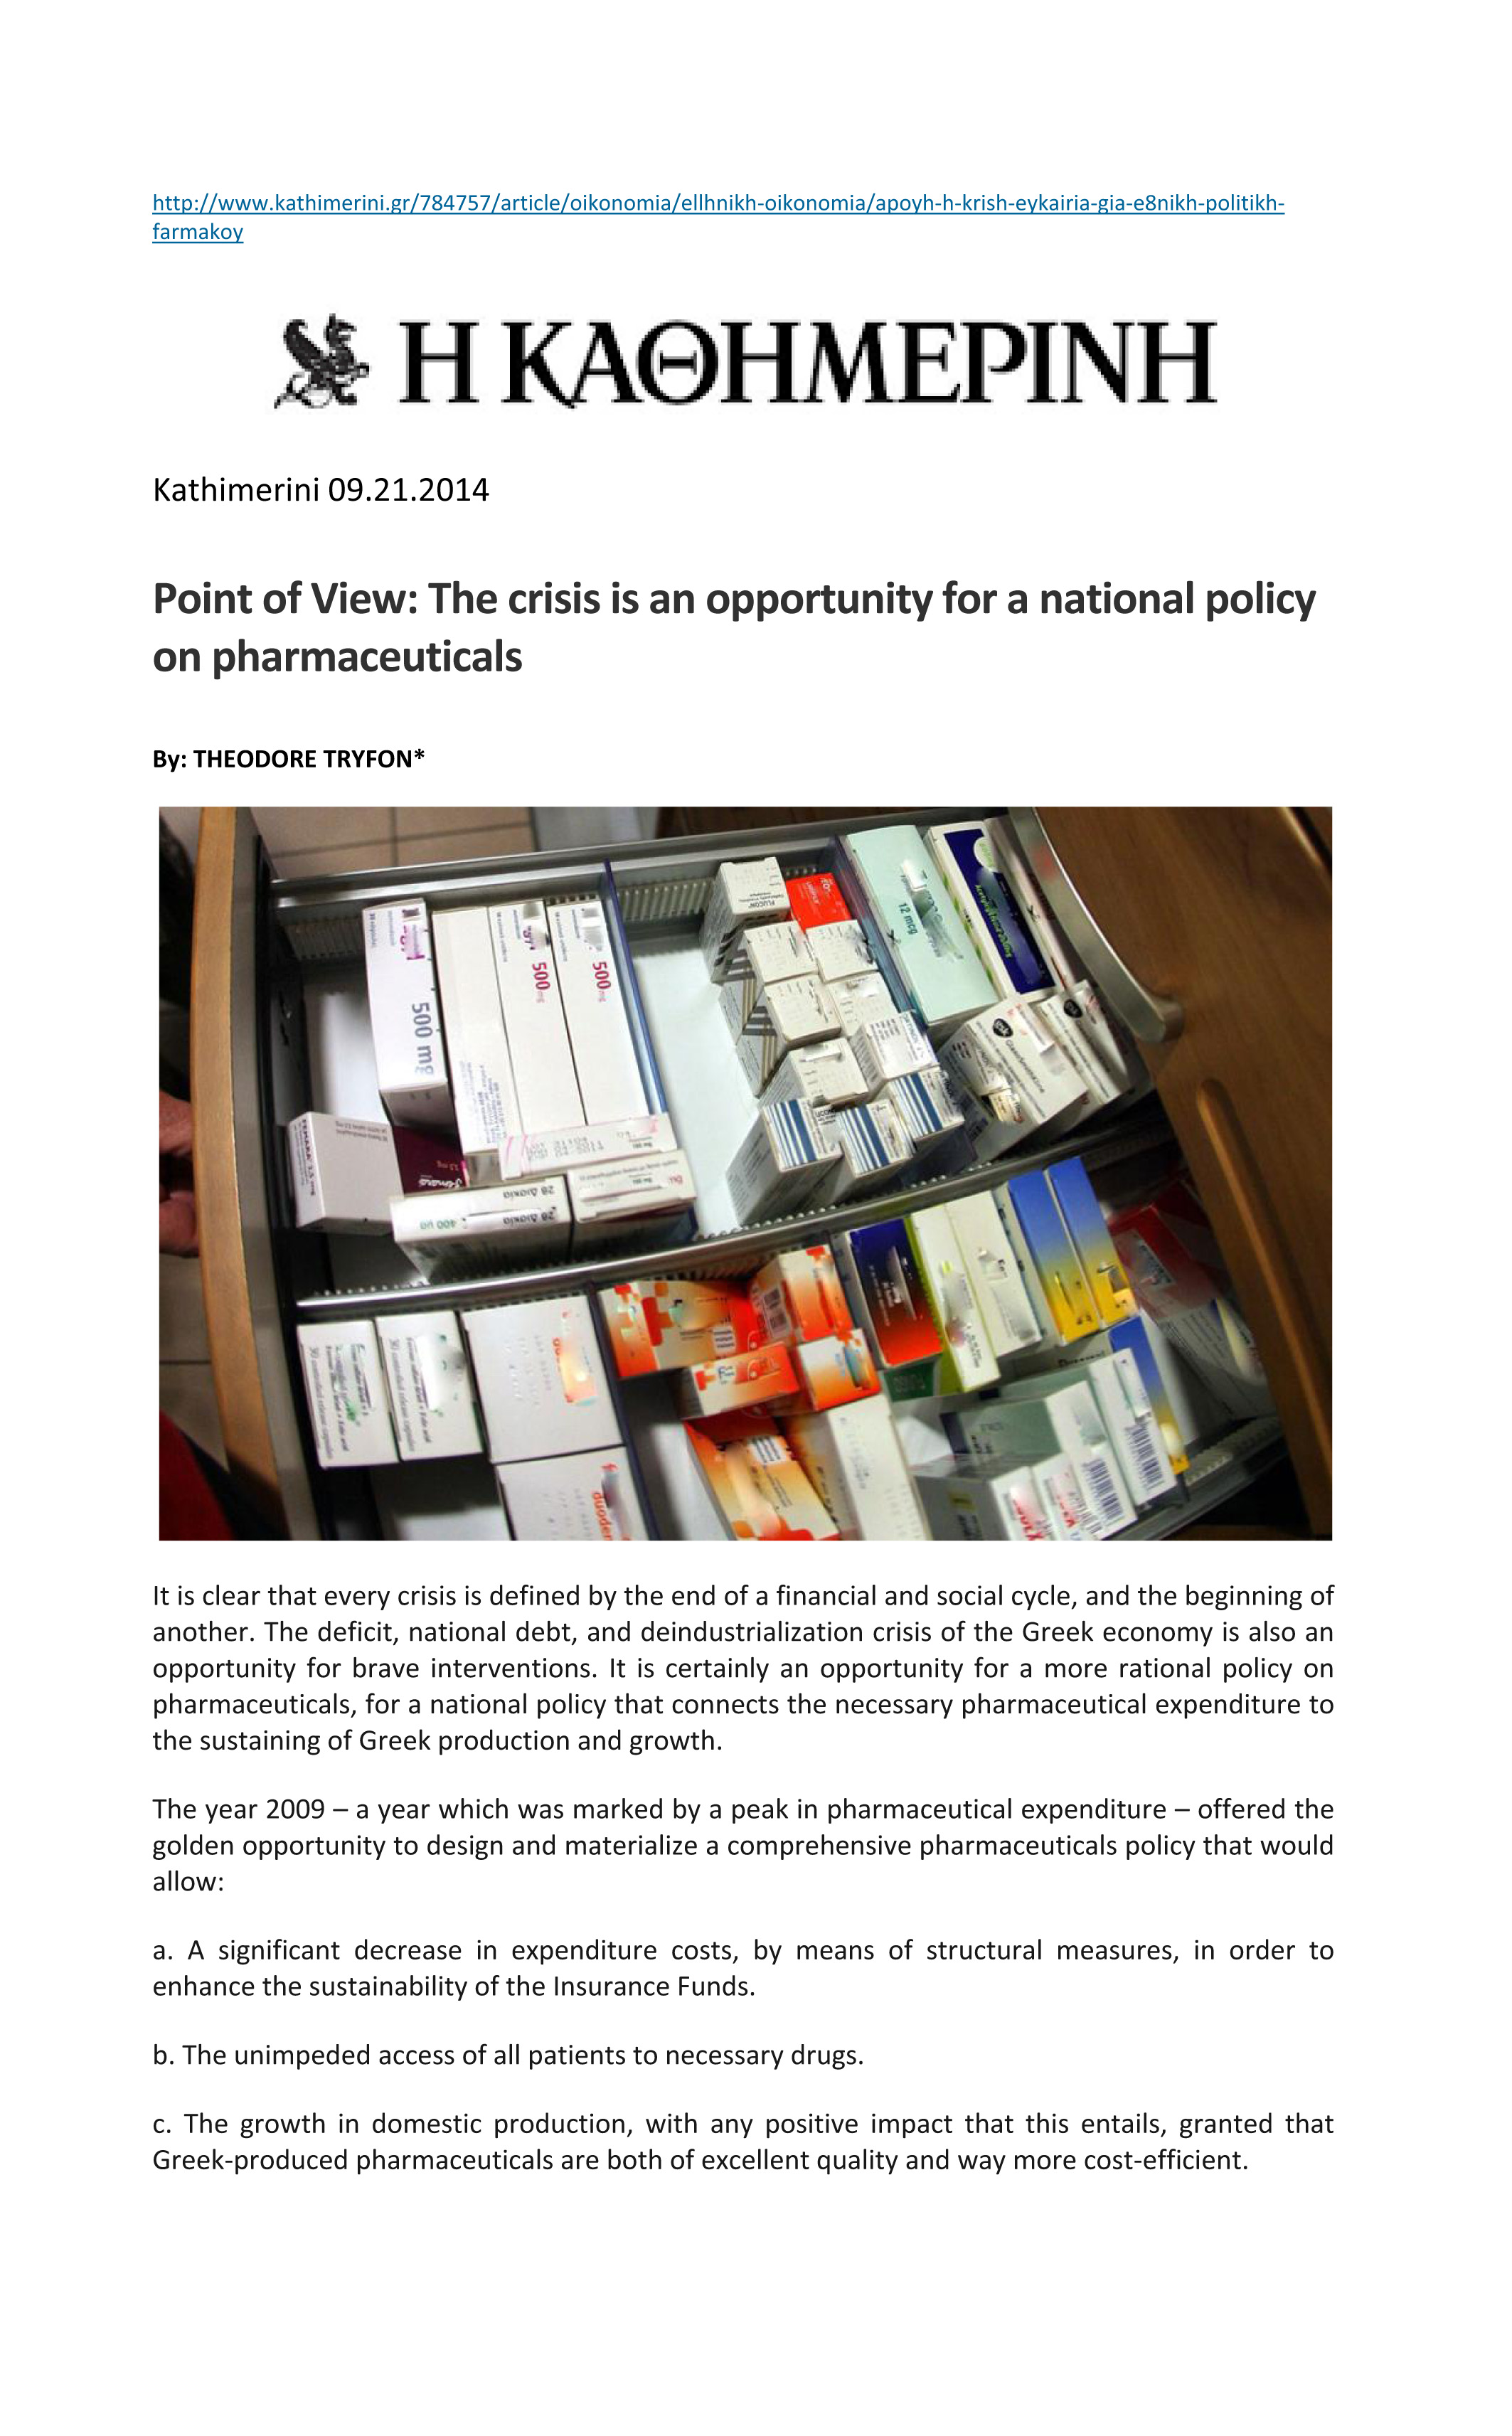 Kathimerini 09.21.2014 Point of View: The crisis is an opportunity for a national policy on pharmaceuticals By: Theodore Tryfon